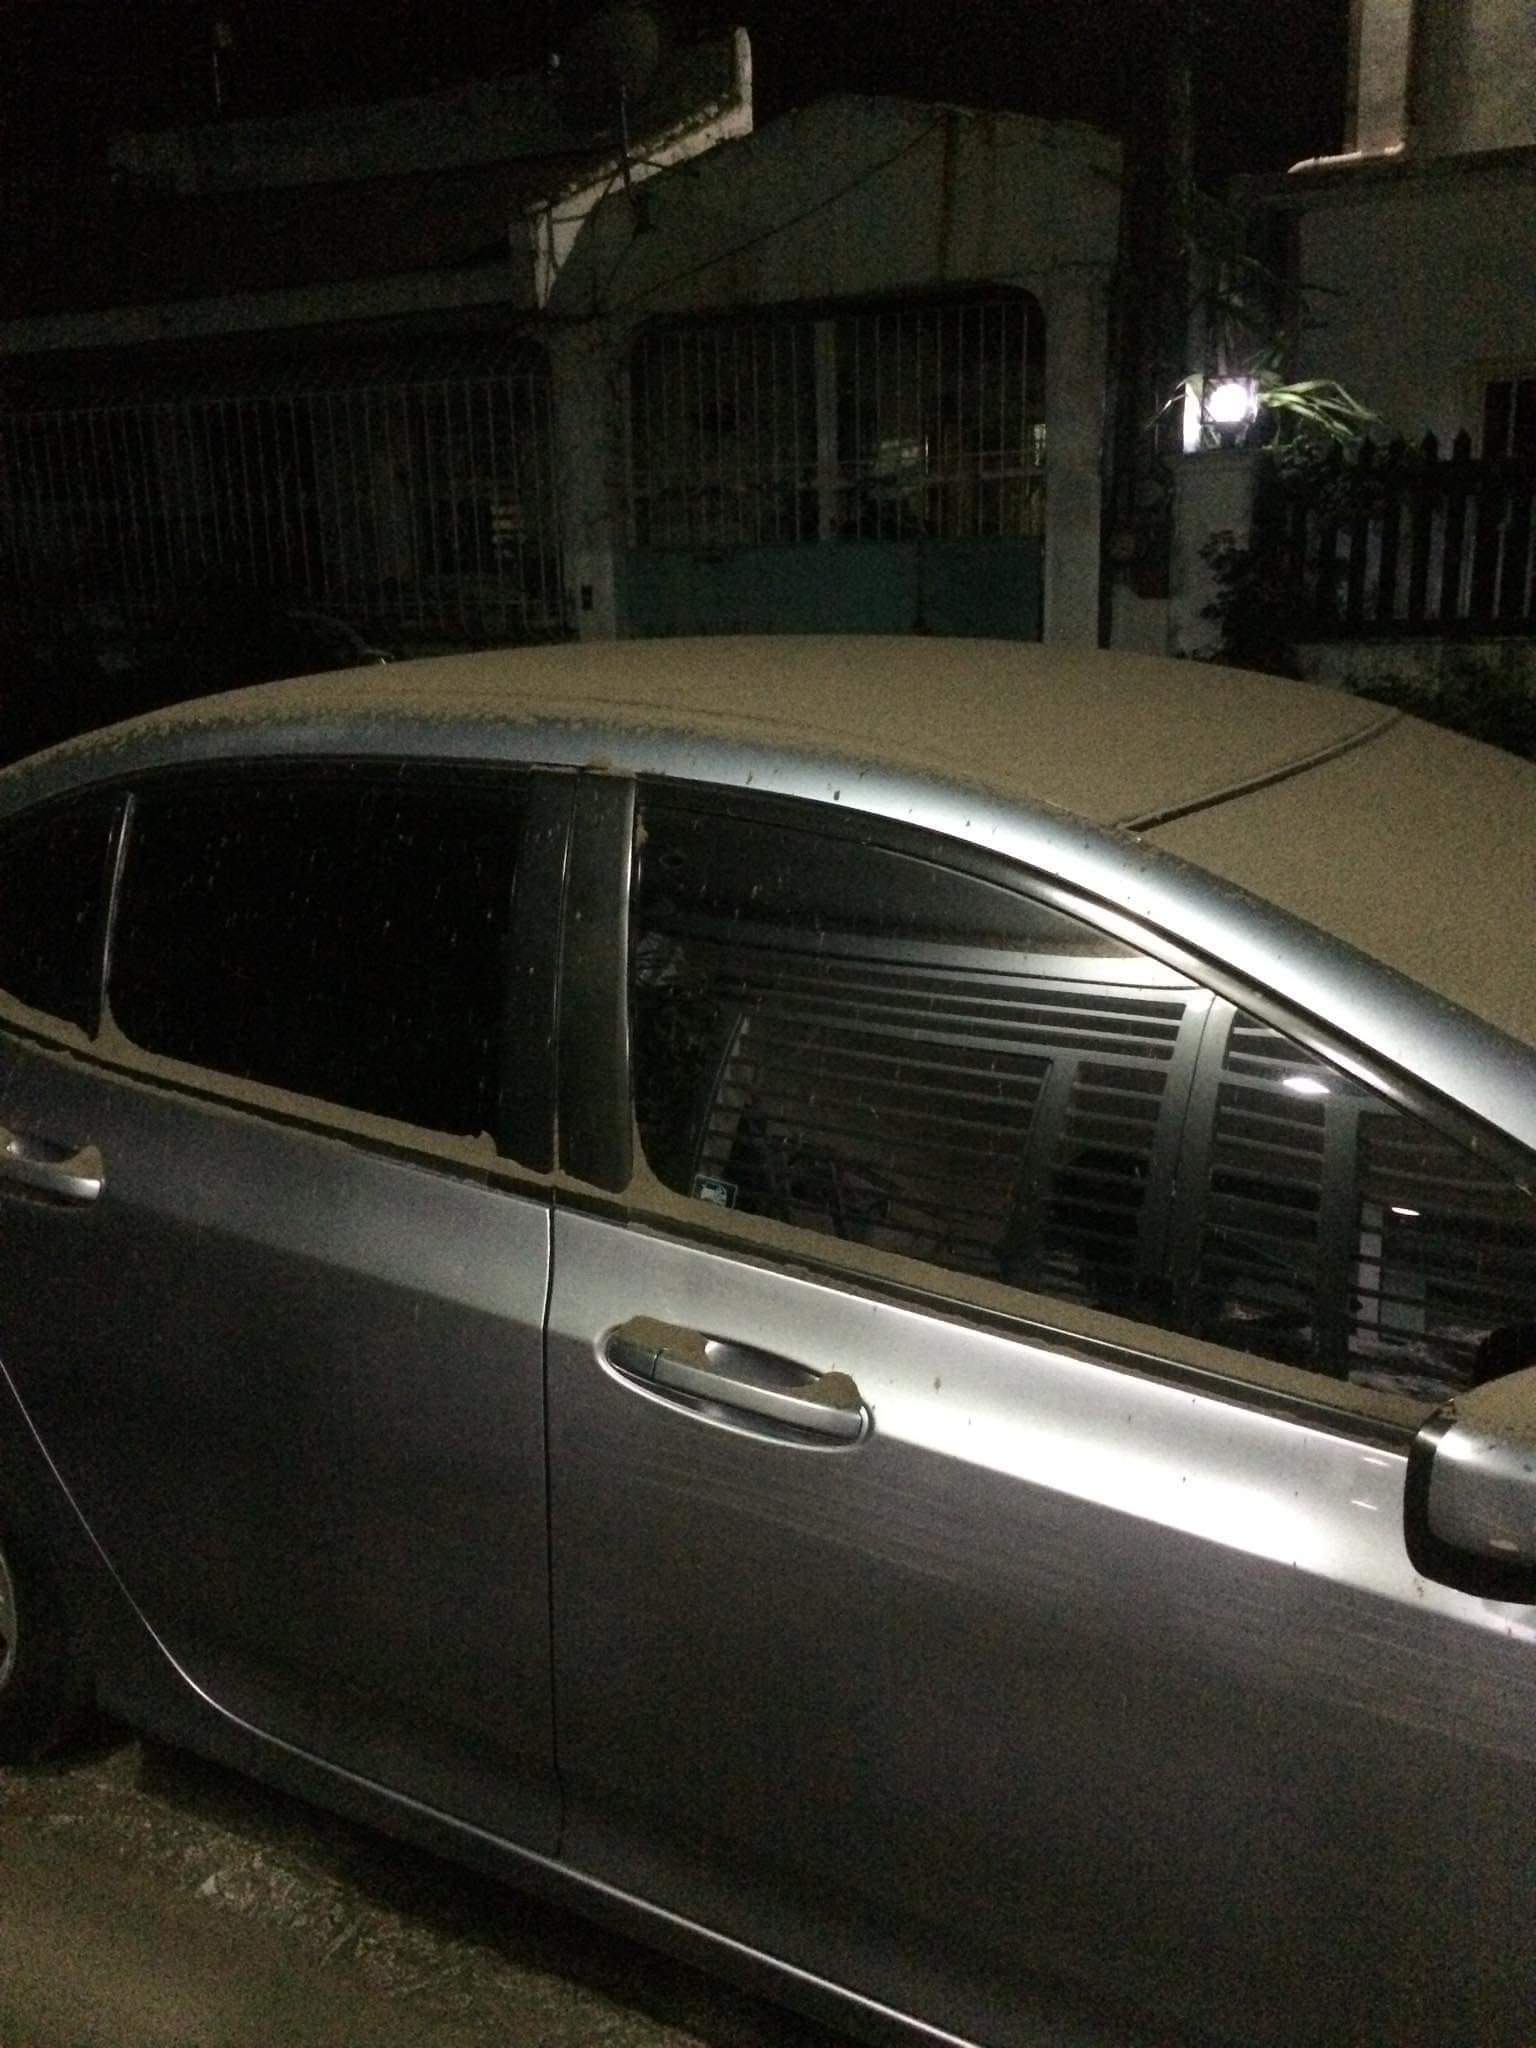 Ash fall on a car in Cavite, Philippines (Source: Rizza/Twitter)